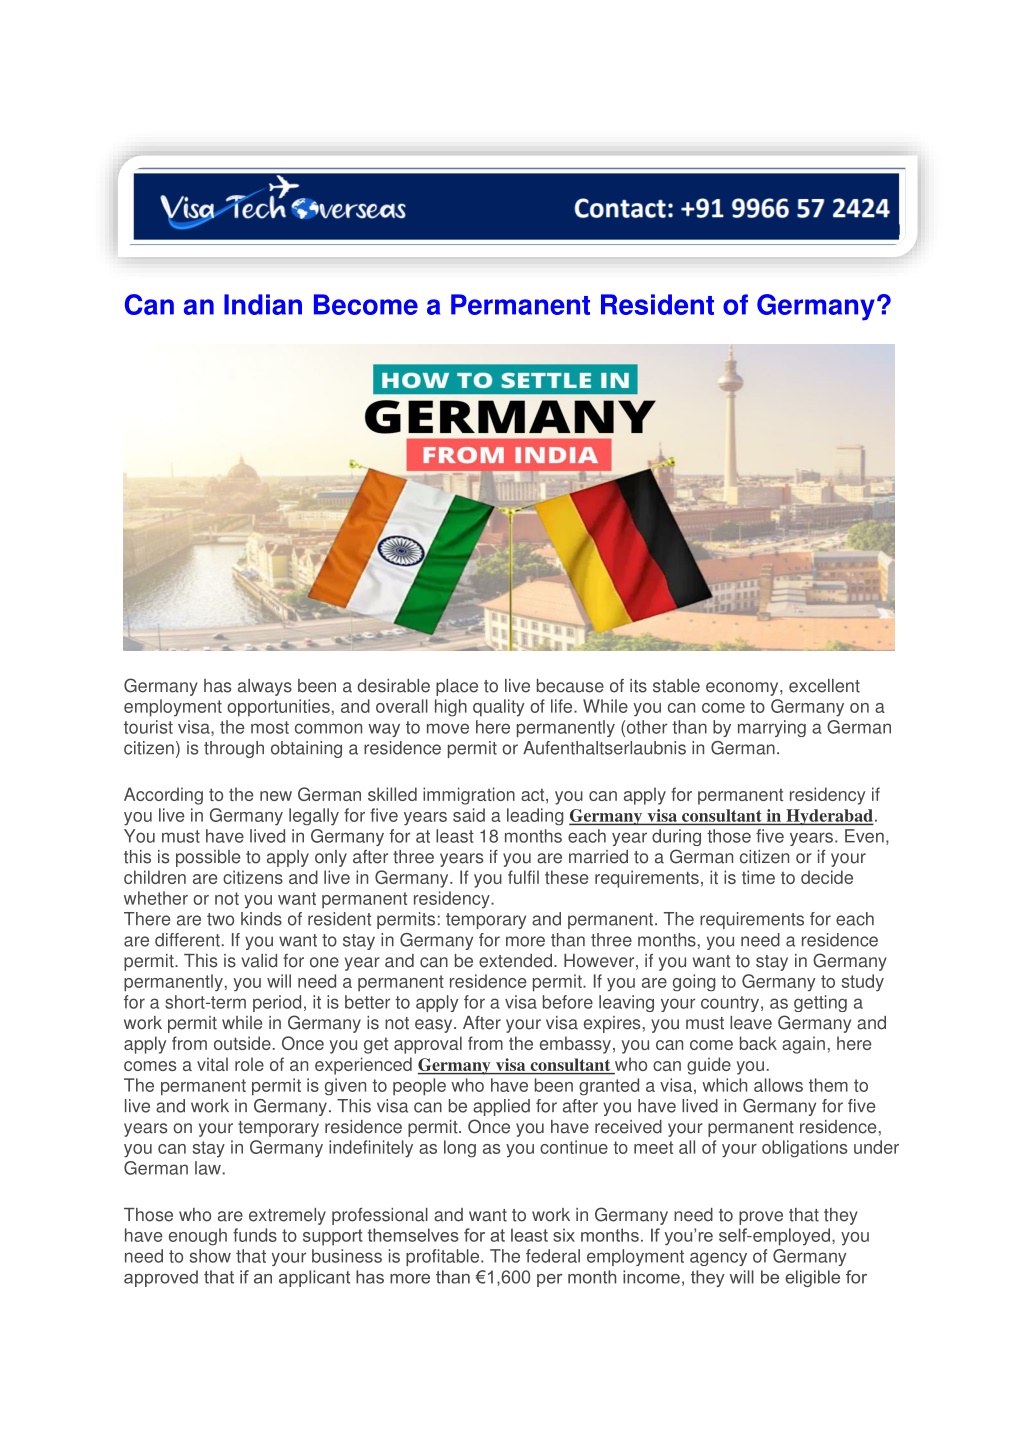 can an indian become a permanent resident l.w